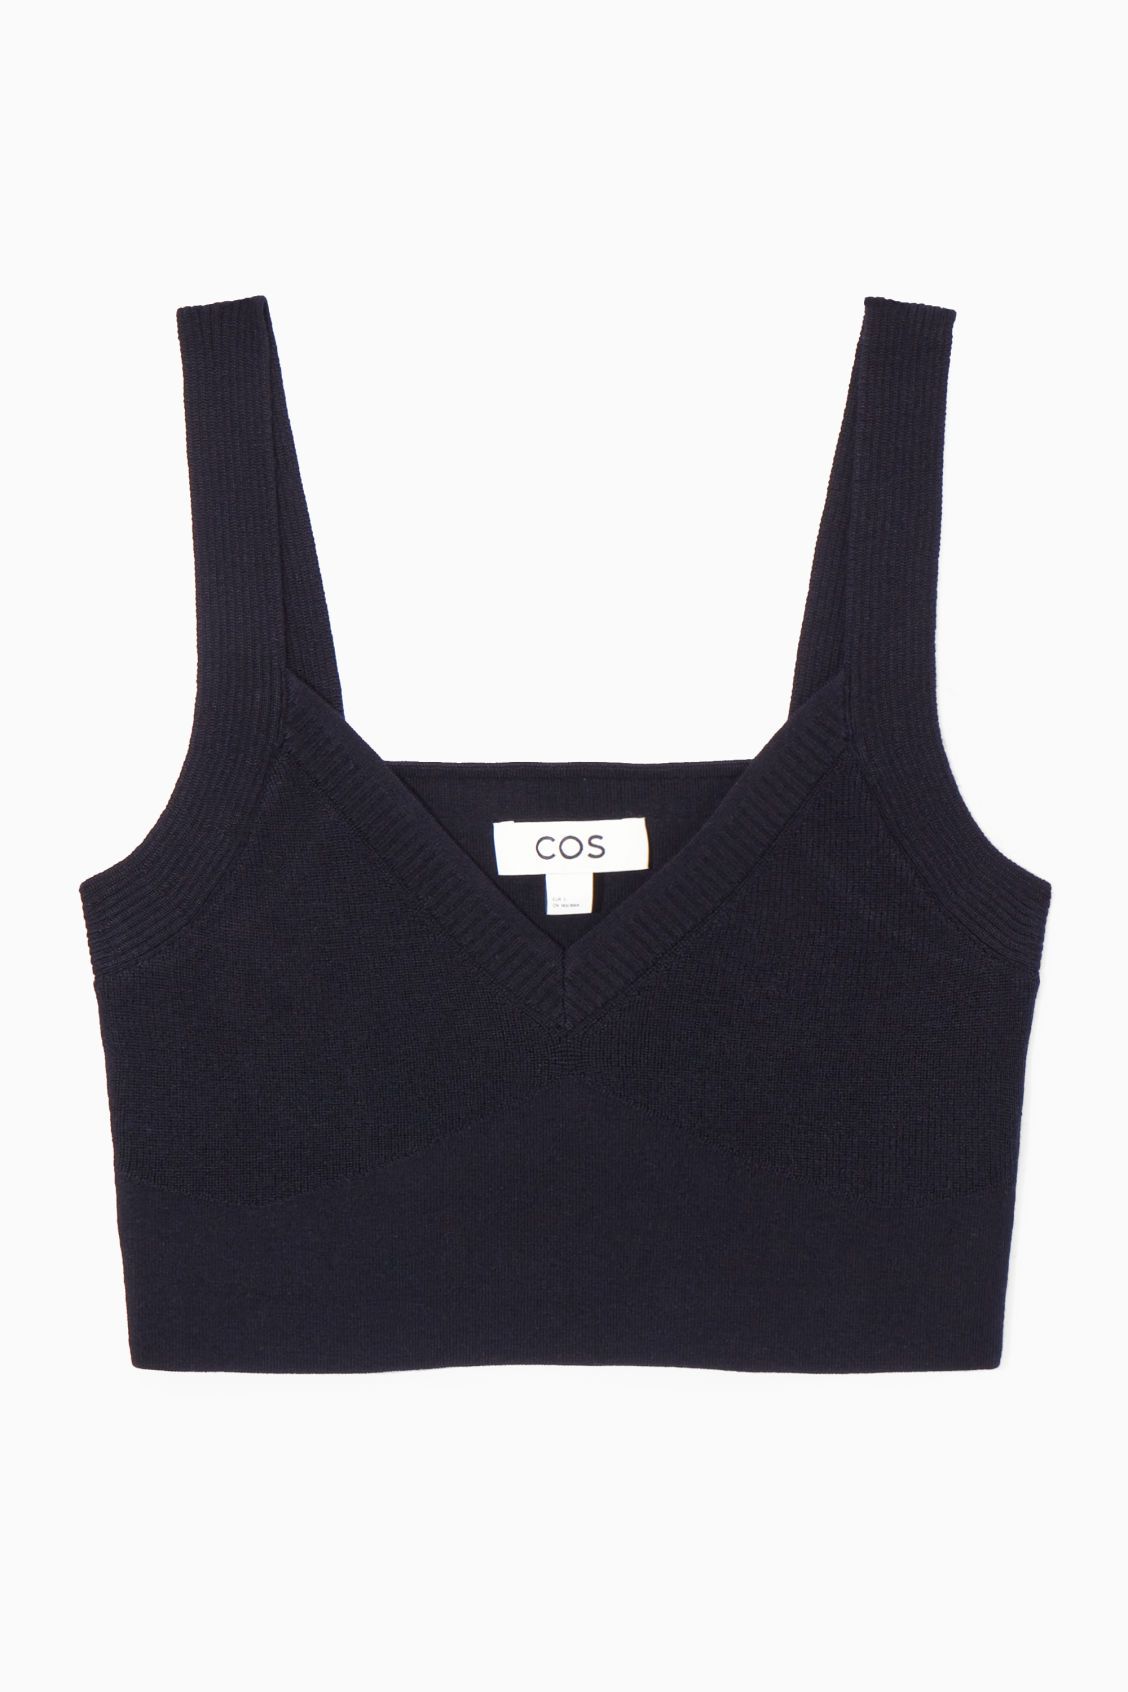 KNITTED V-NECK BRALETTE - NAVY - Knitwear - COS | COS (US)